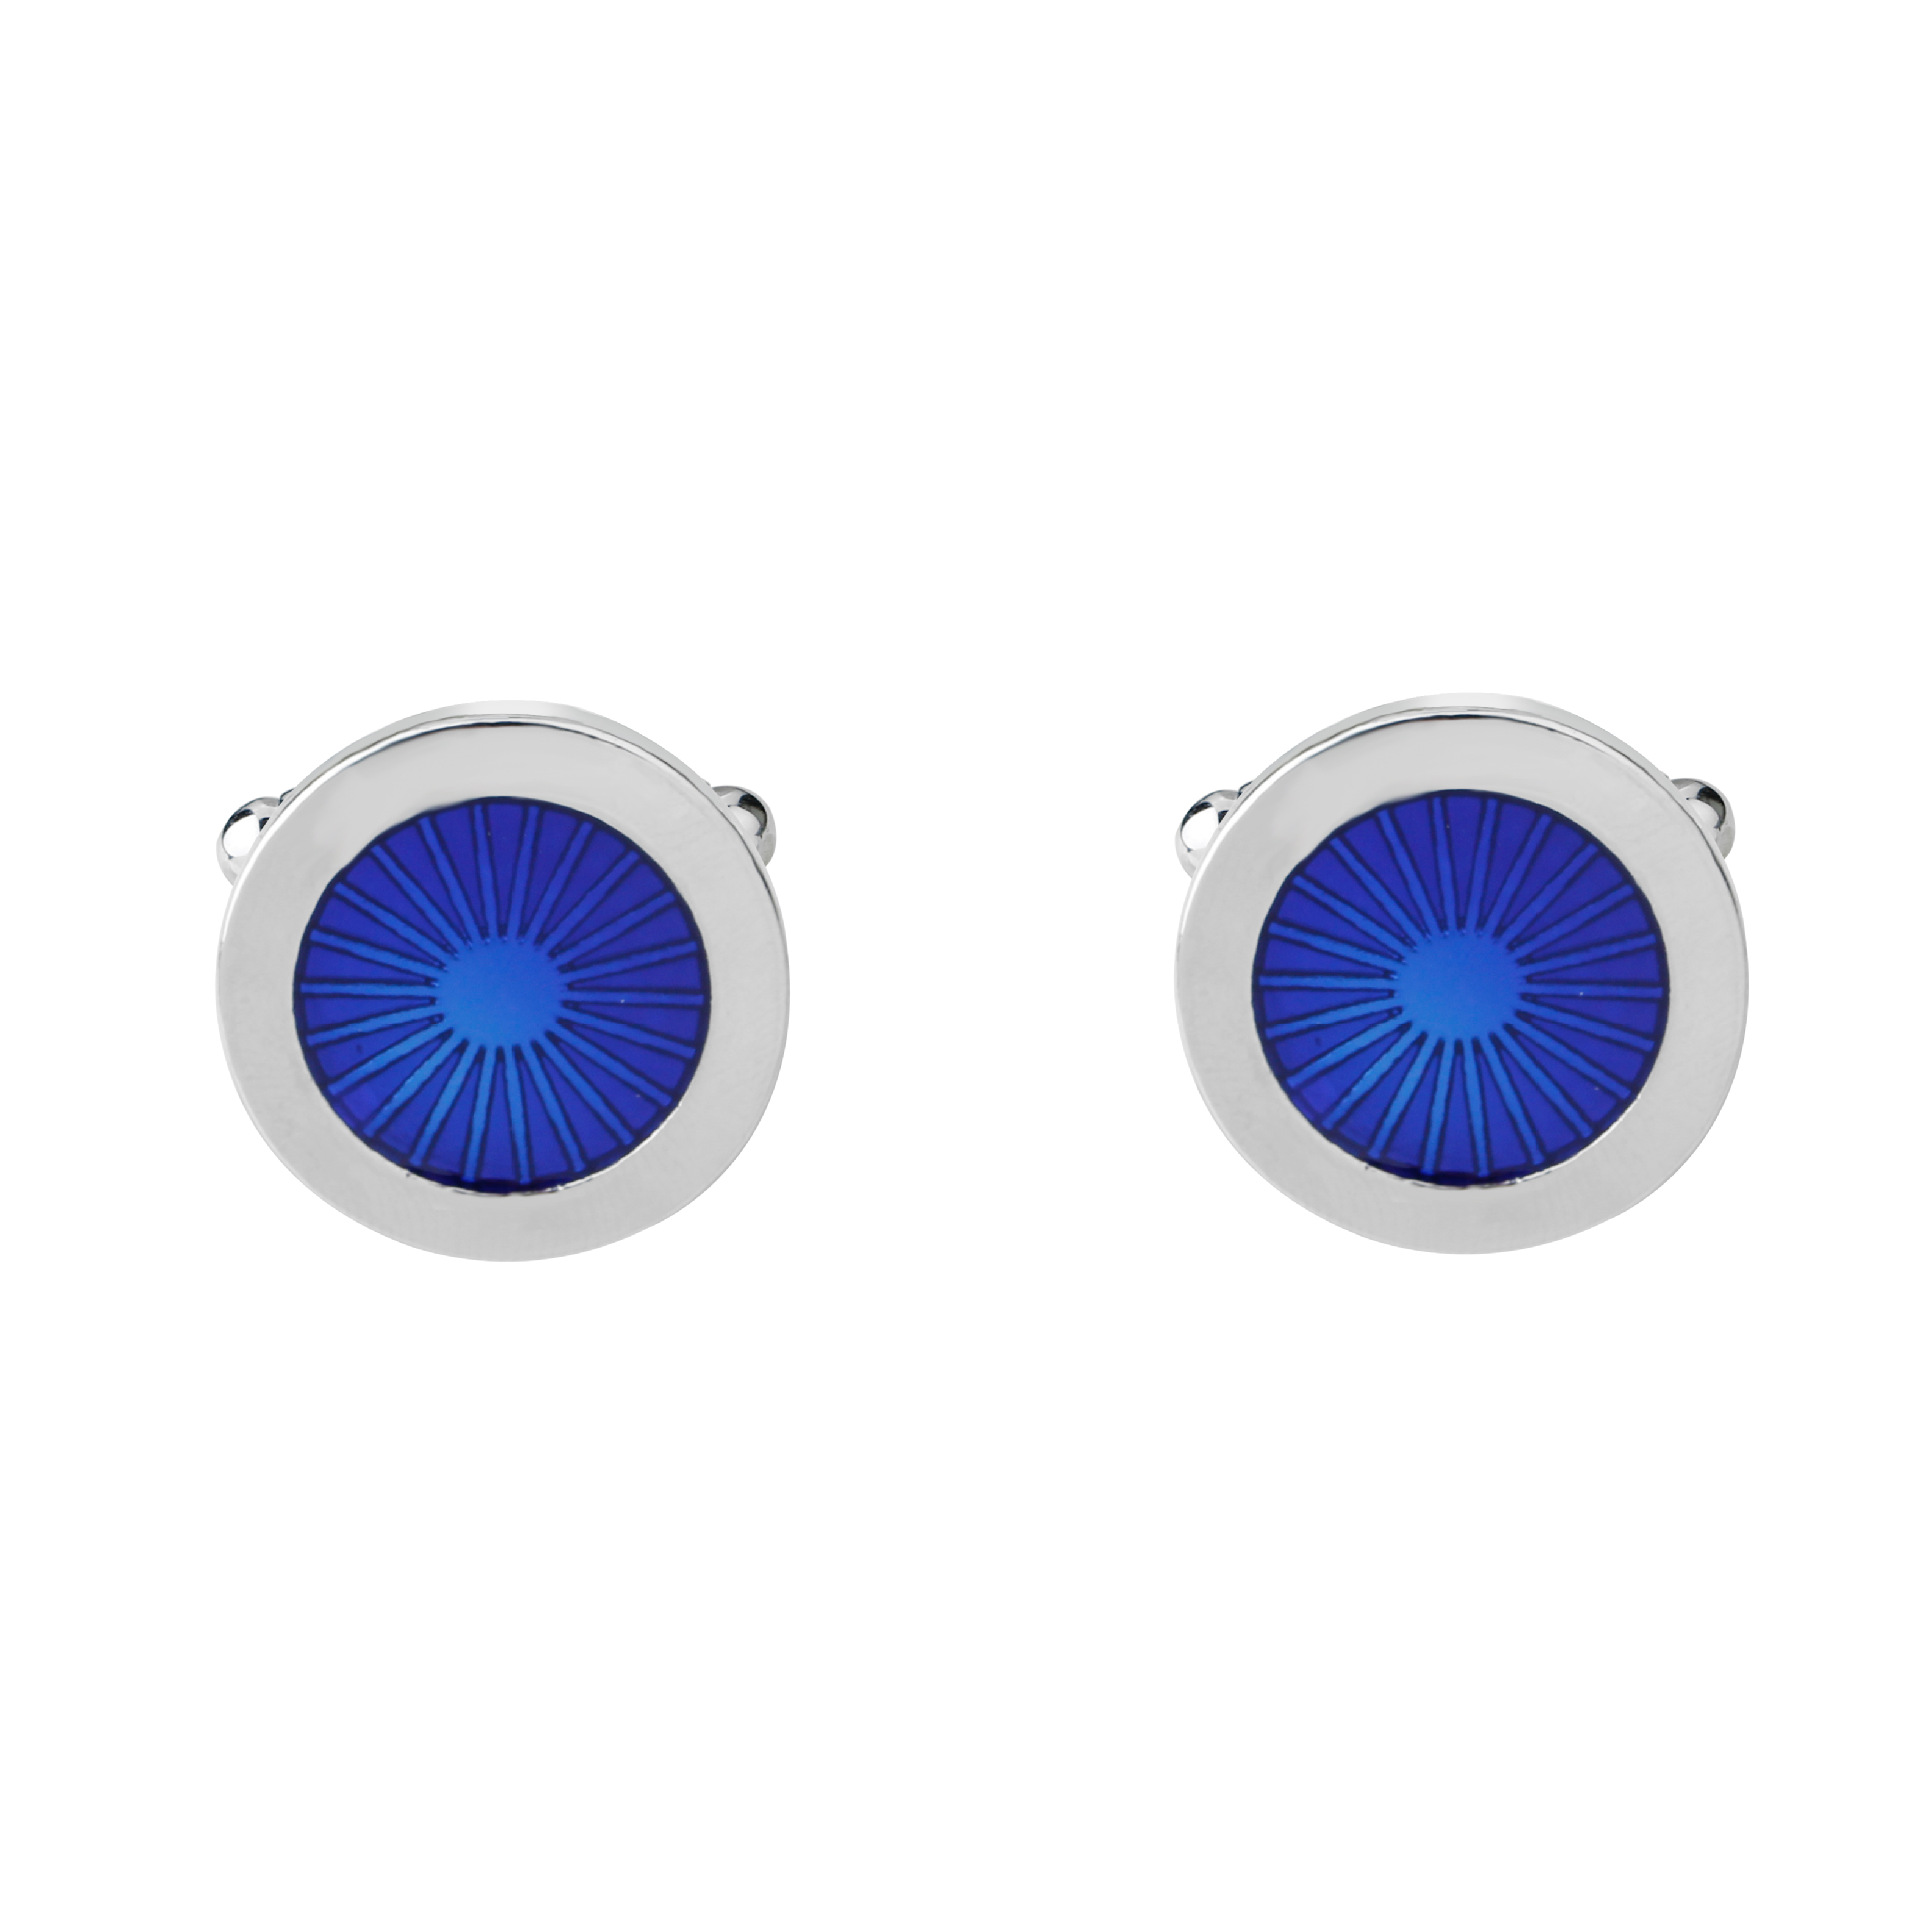 Classic Business Cufflinks for Men's Shirts High Quality Round Blue Cuff Buttons Special Gift